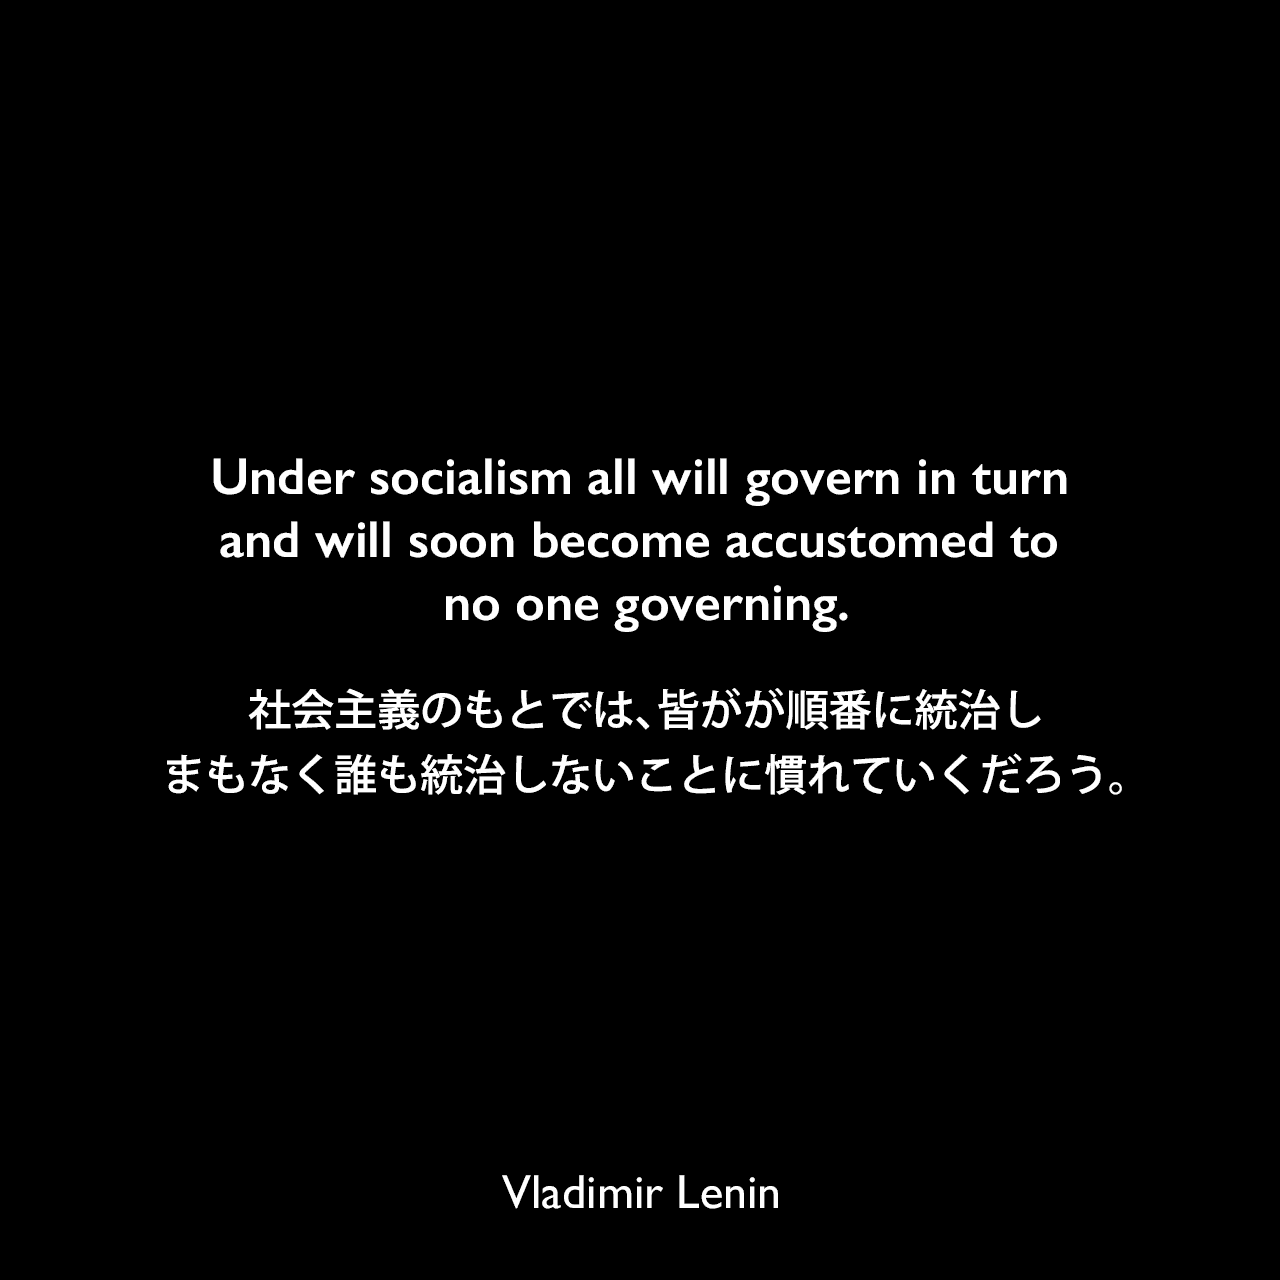 Under socialism all will govern in turn and will soon become accustomed to no one governing.社会主義のもとでは、皆がが順番に統治し、まもなく誰も統治しないことに慣れていくだろう。Vladimir Lenin